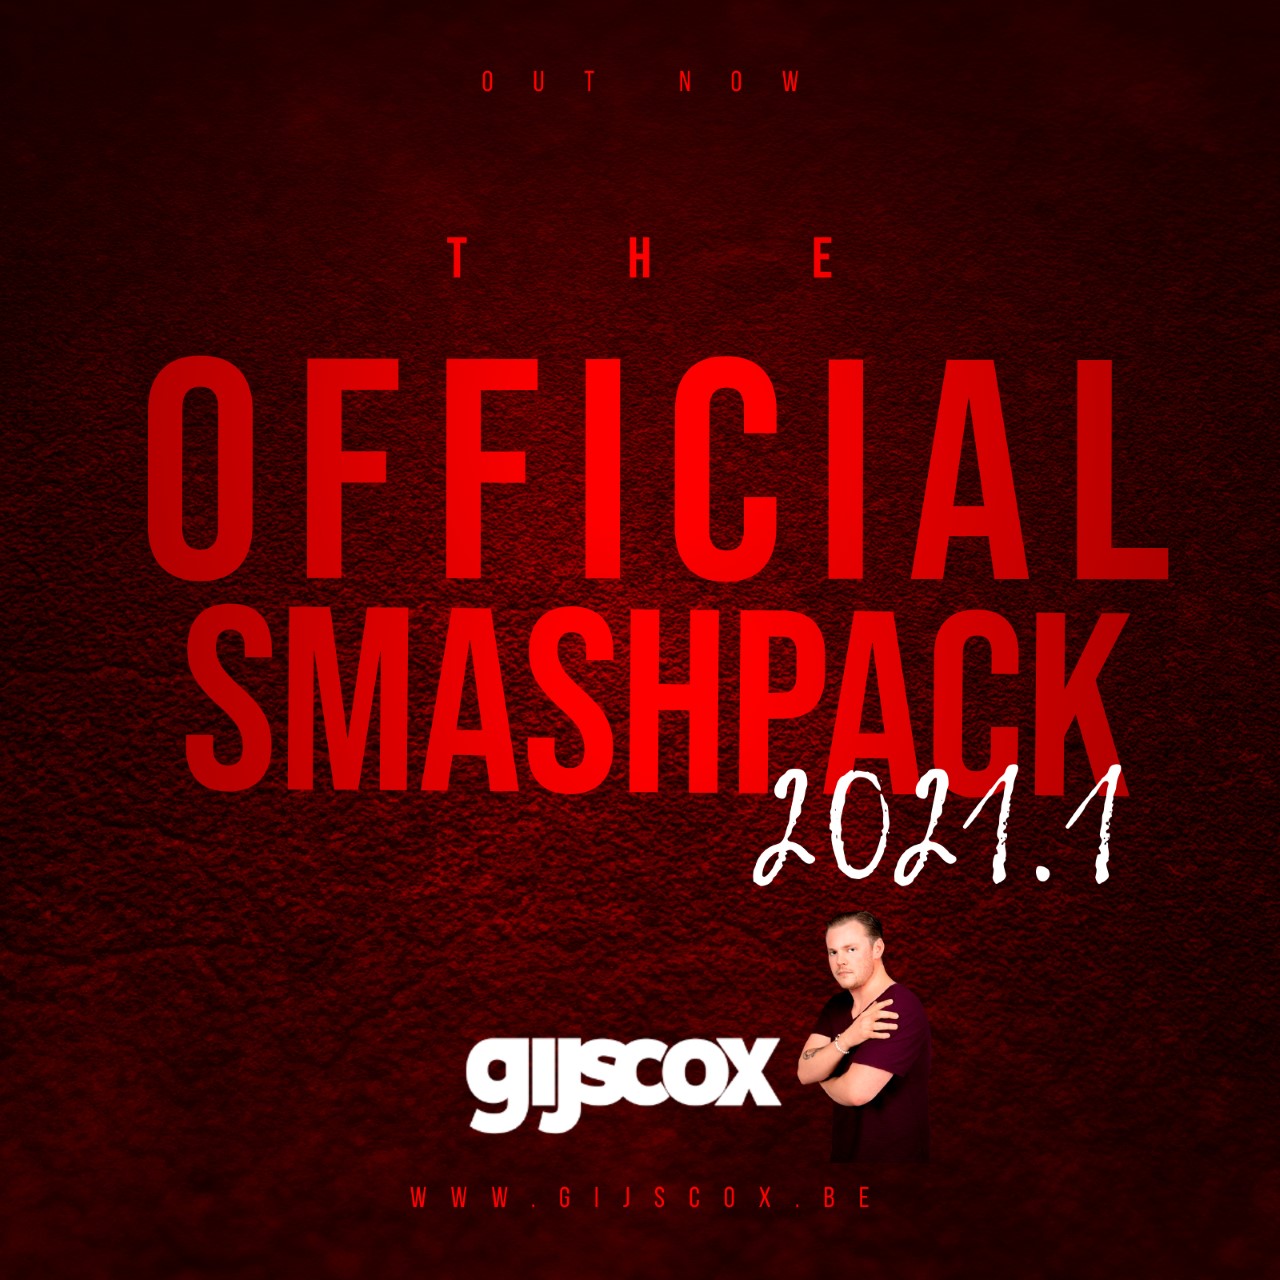 Gijs Cox - The Official Smashpack 2021.1